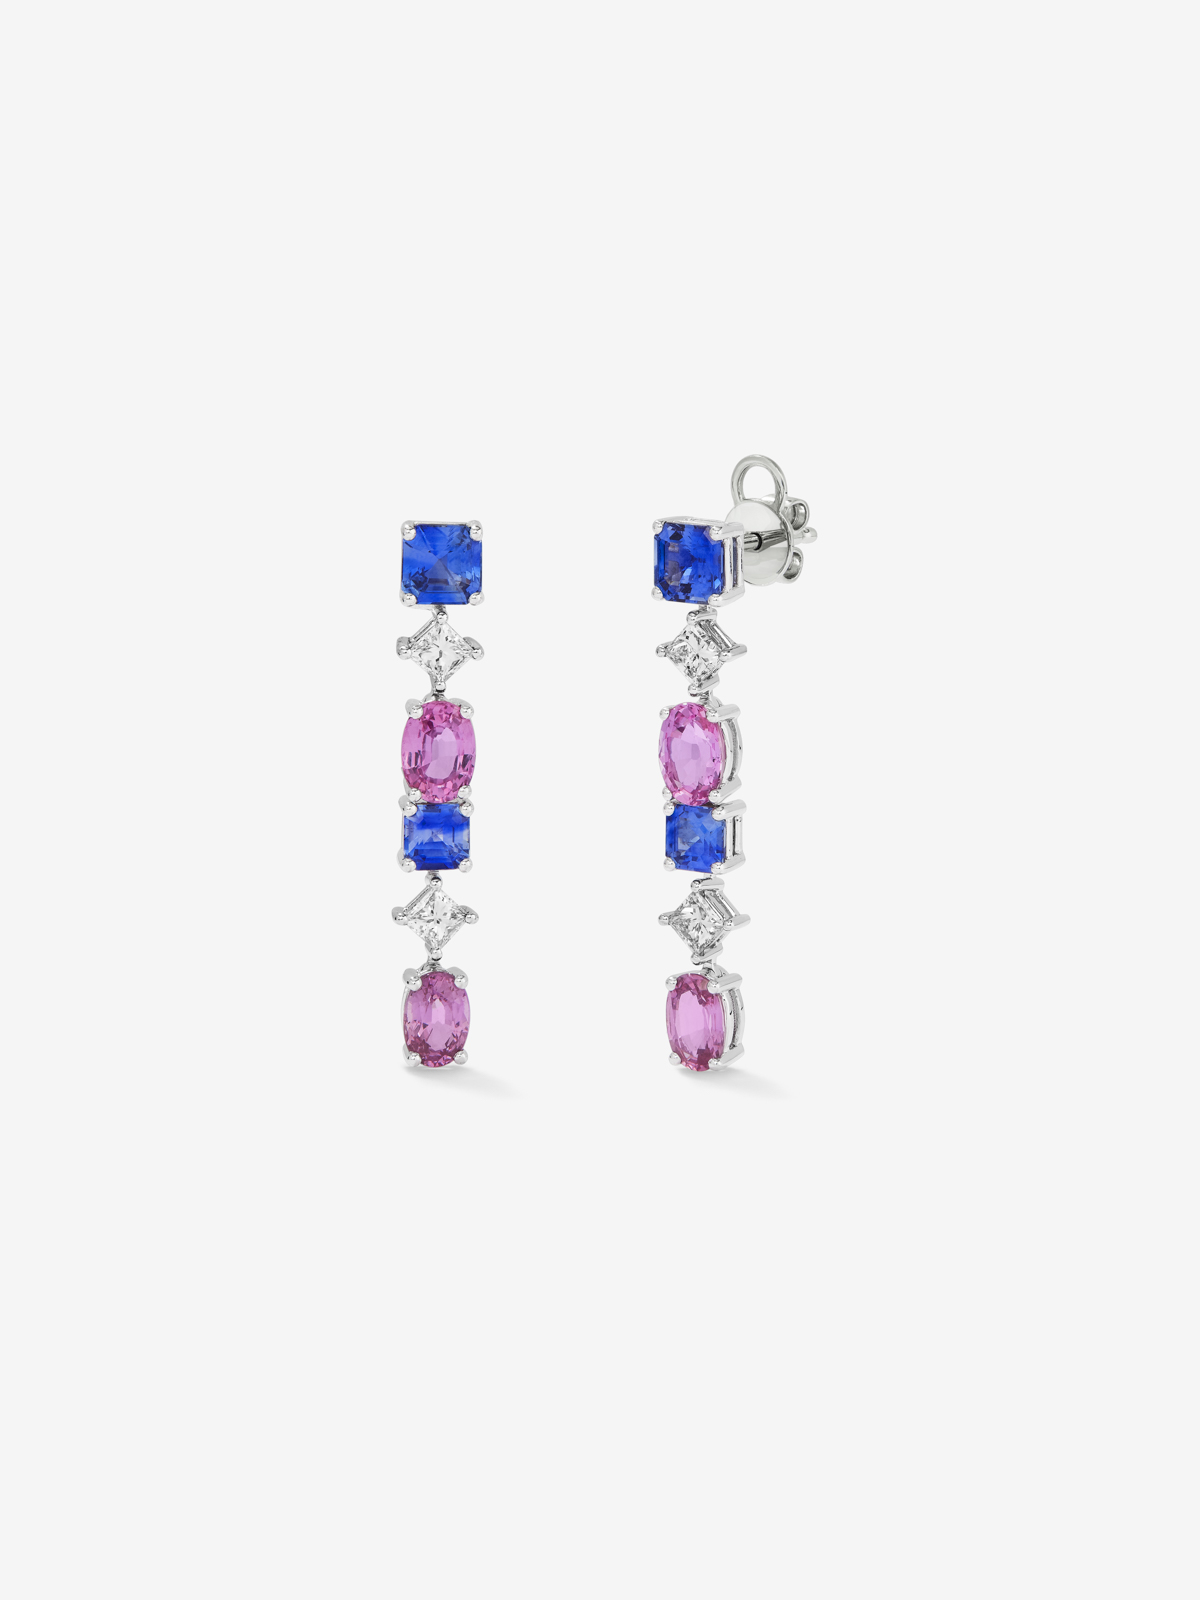 18K White Gold Gold Earrings with Blue Sapphires in octagonal 2,19 cts, oval pink sapphires of 2.96 cts and white diamonds in 0.65 cts princess size